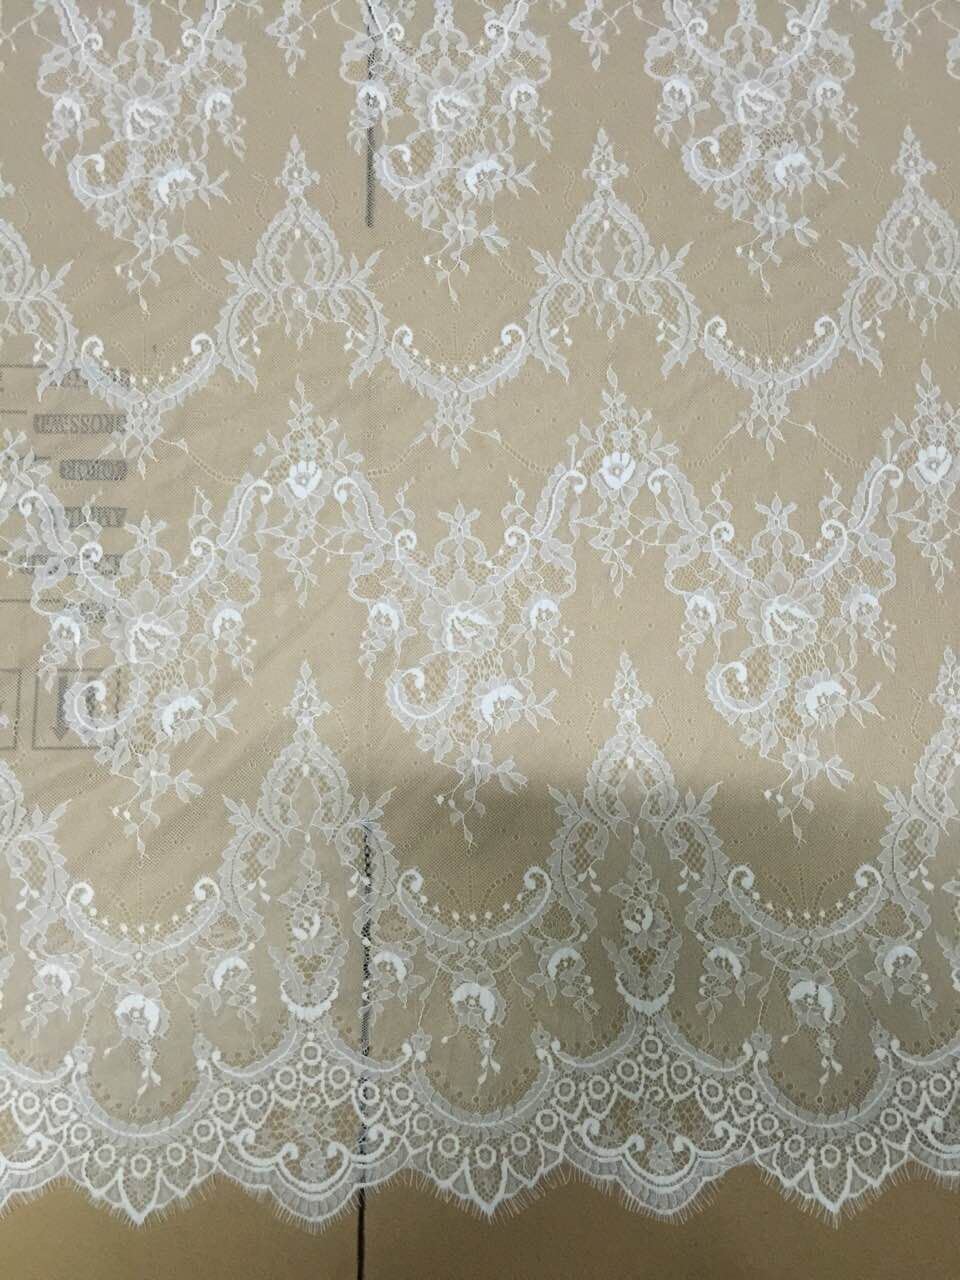 Factory Stock Nylon Fabric Lace for Wedding 20180821-1